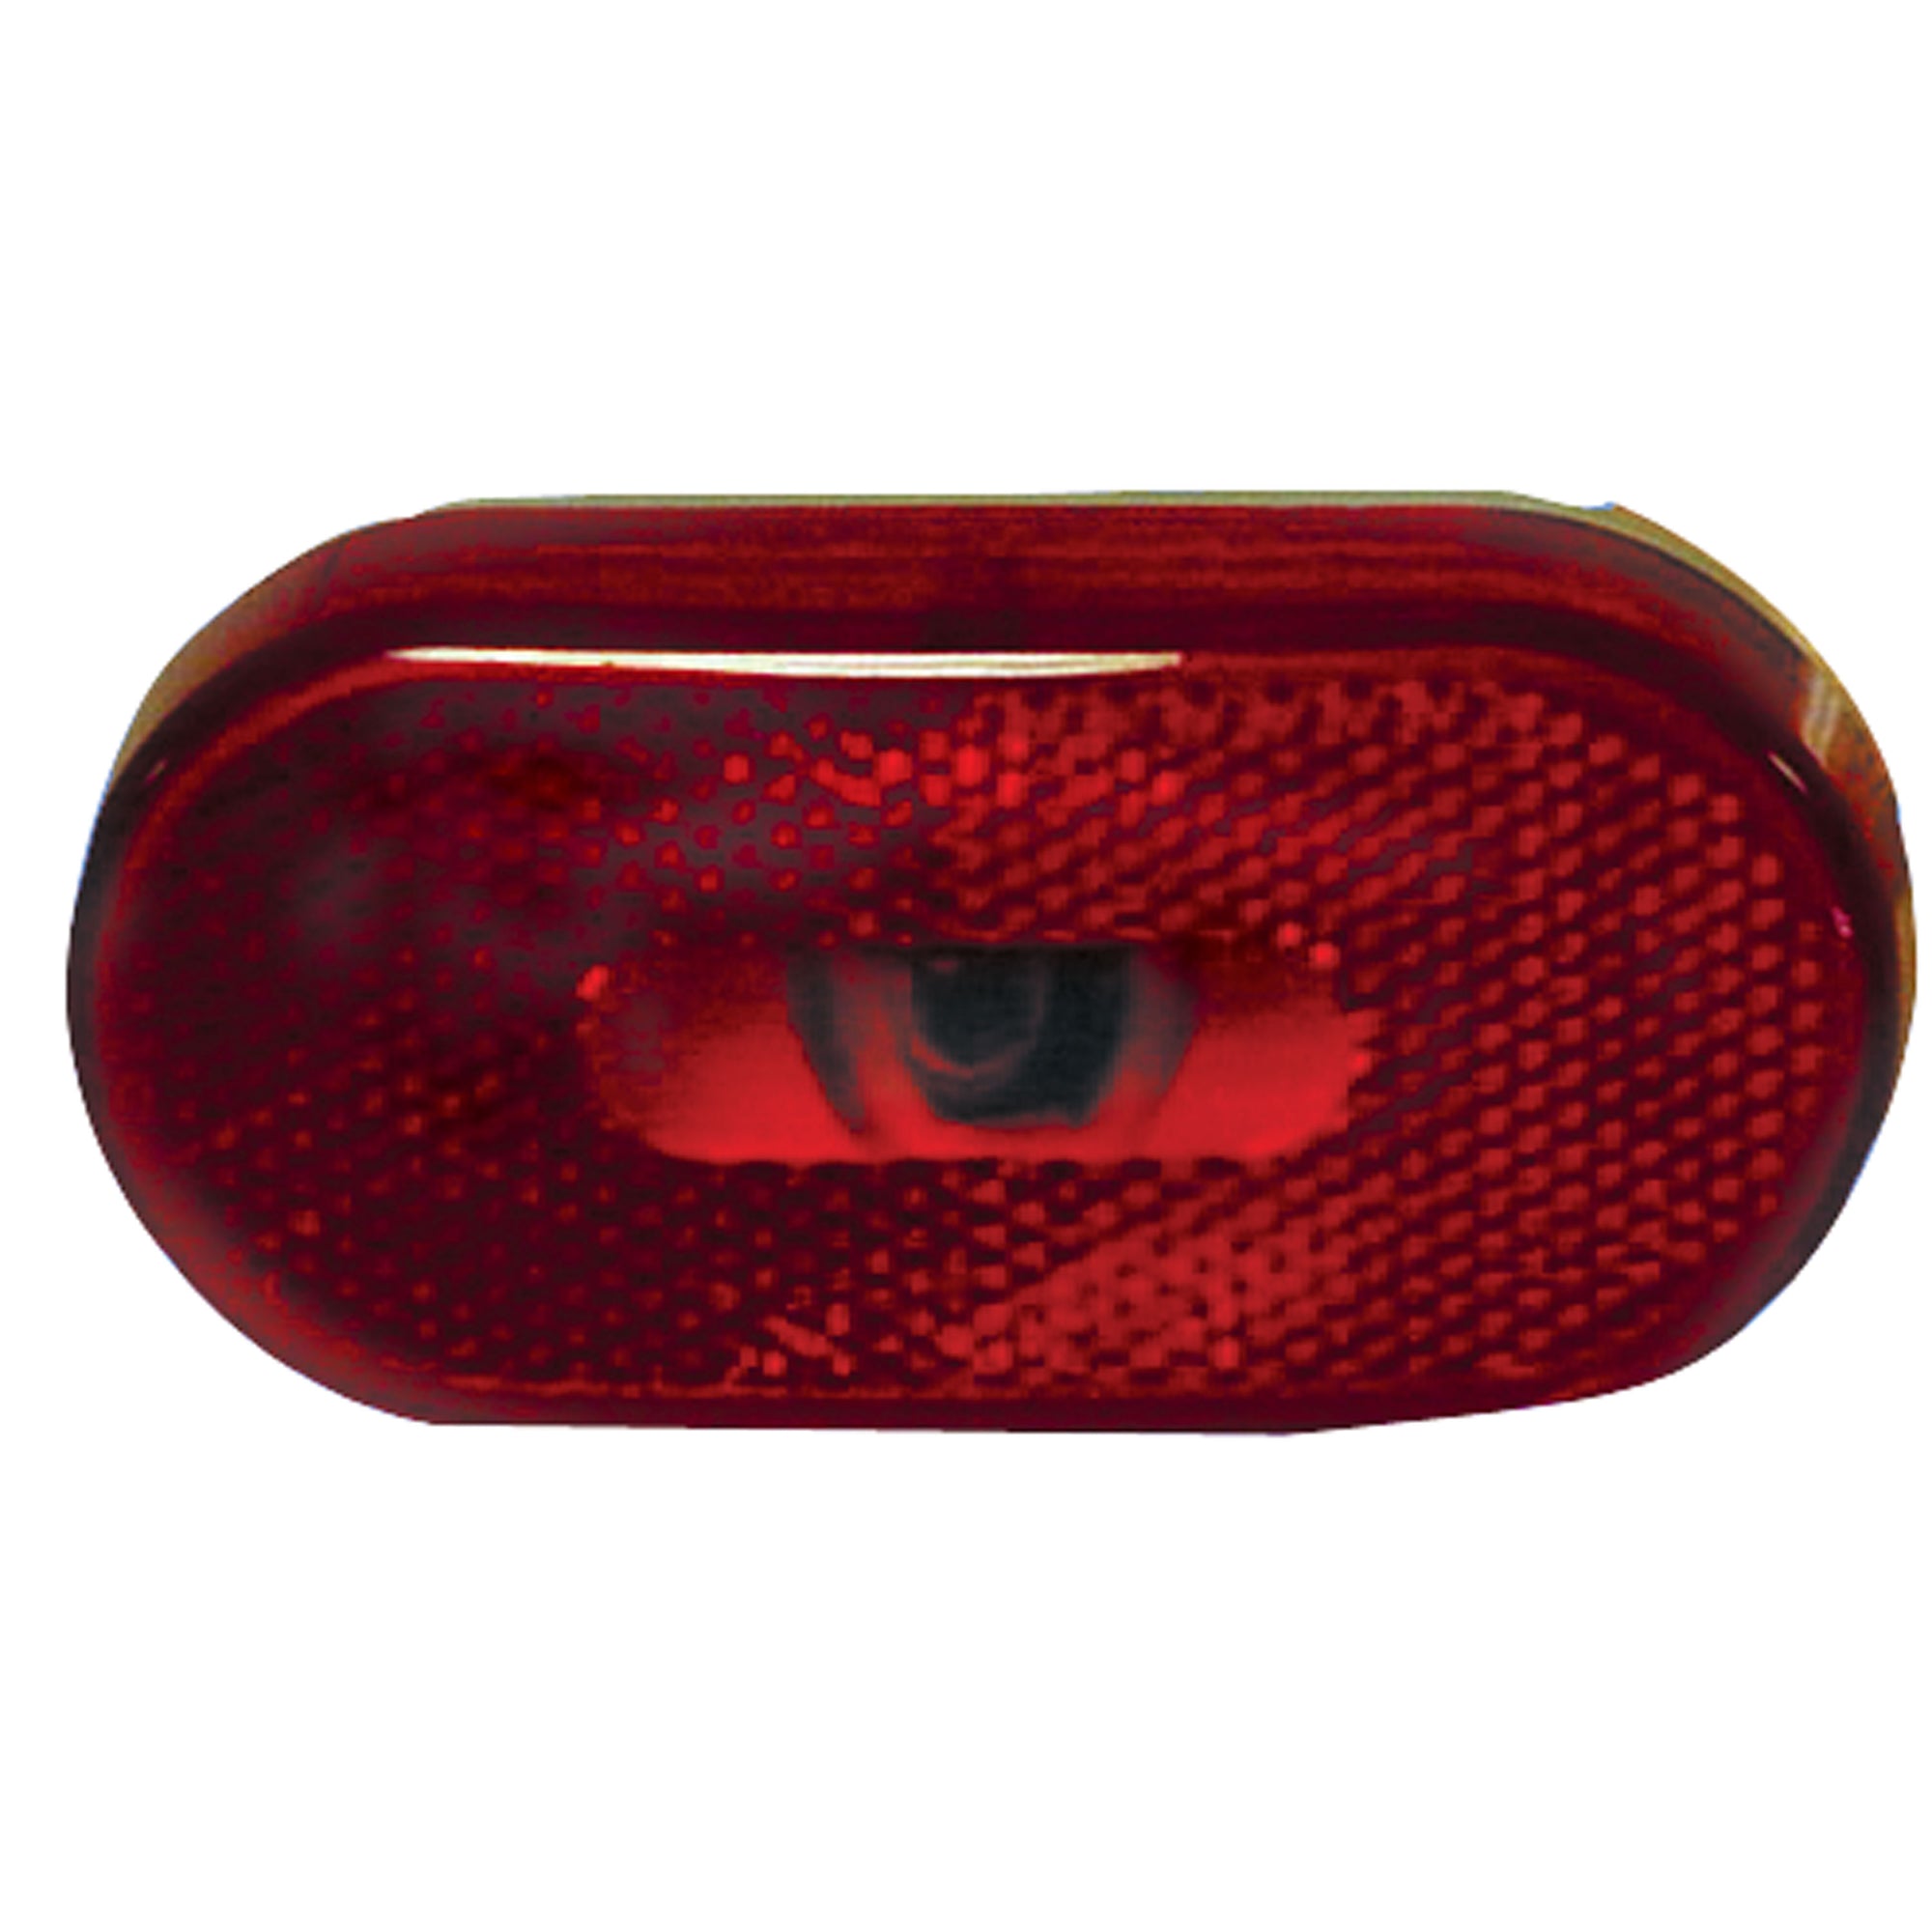 Fasteners Unlimited 003-54P Command Electronics Classic Clearance Light - Red